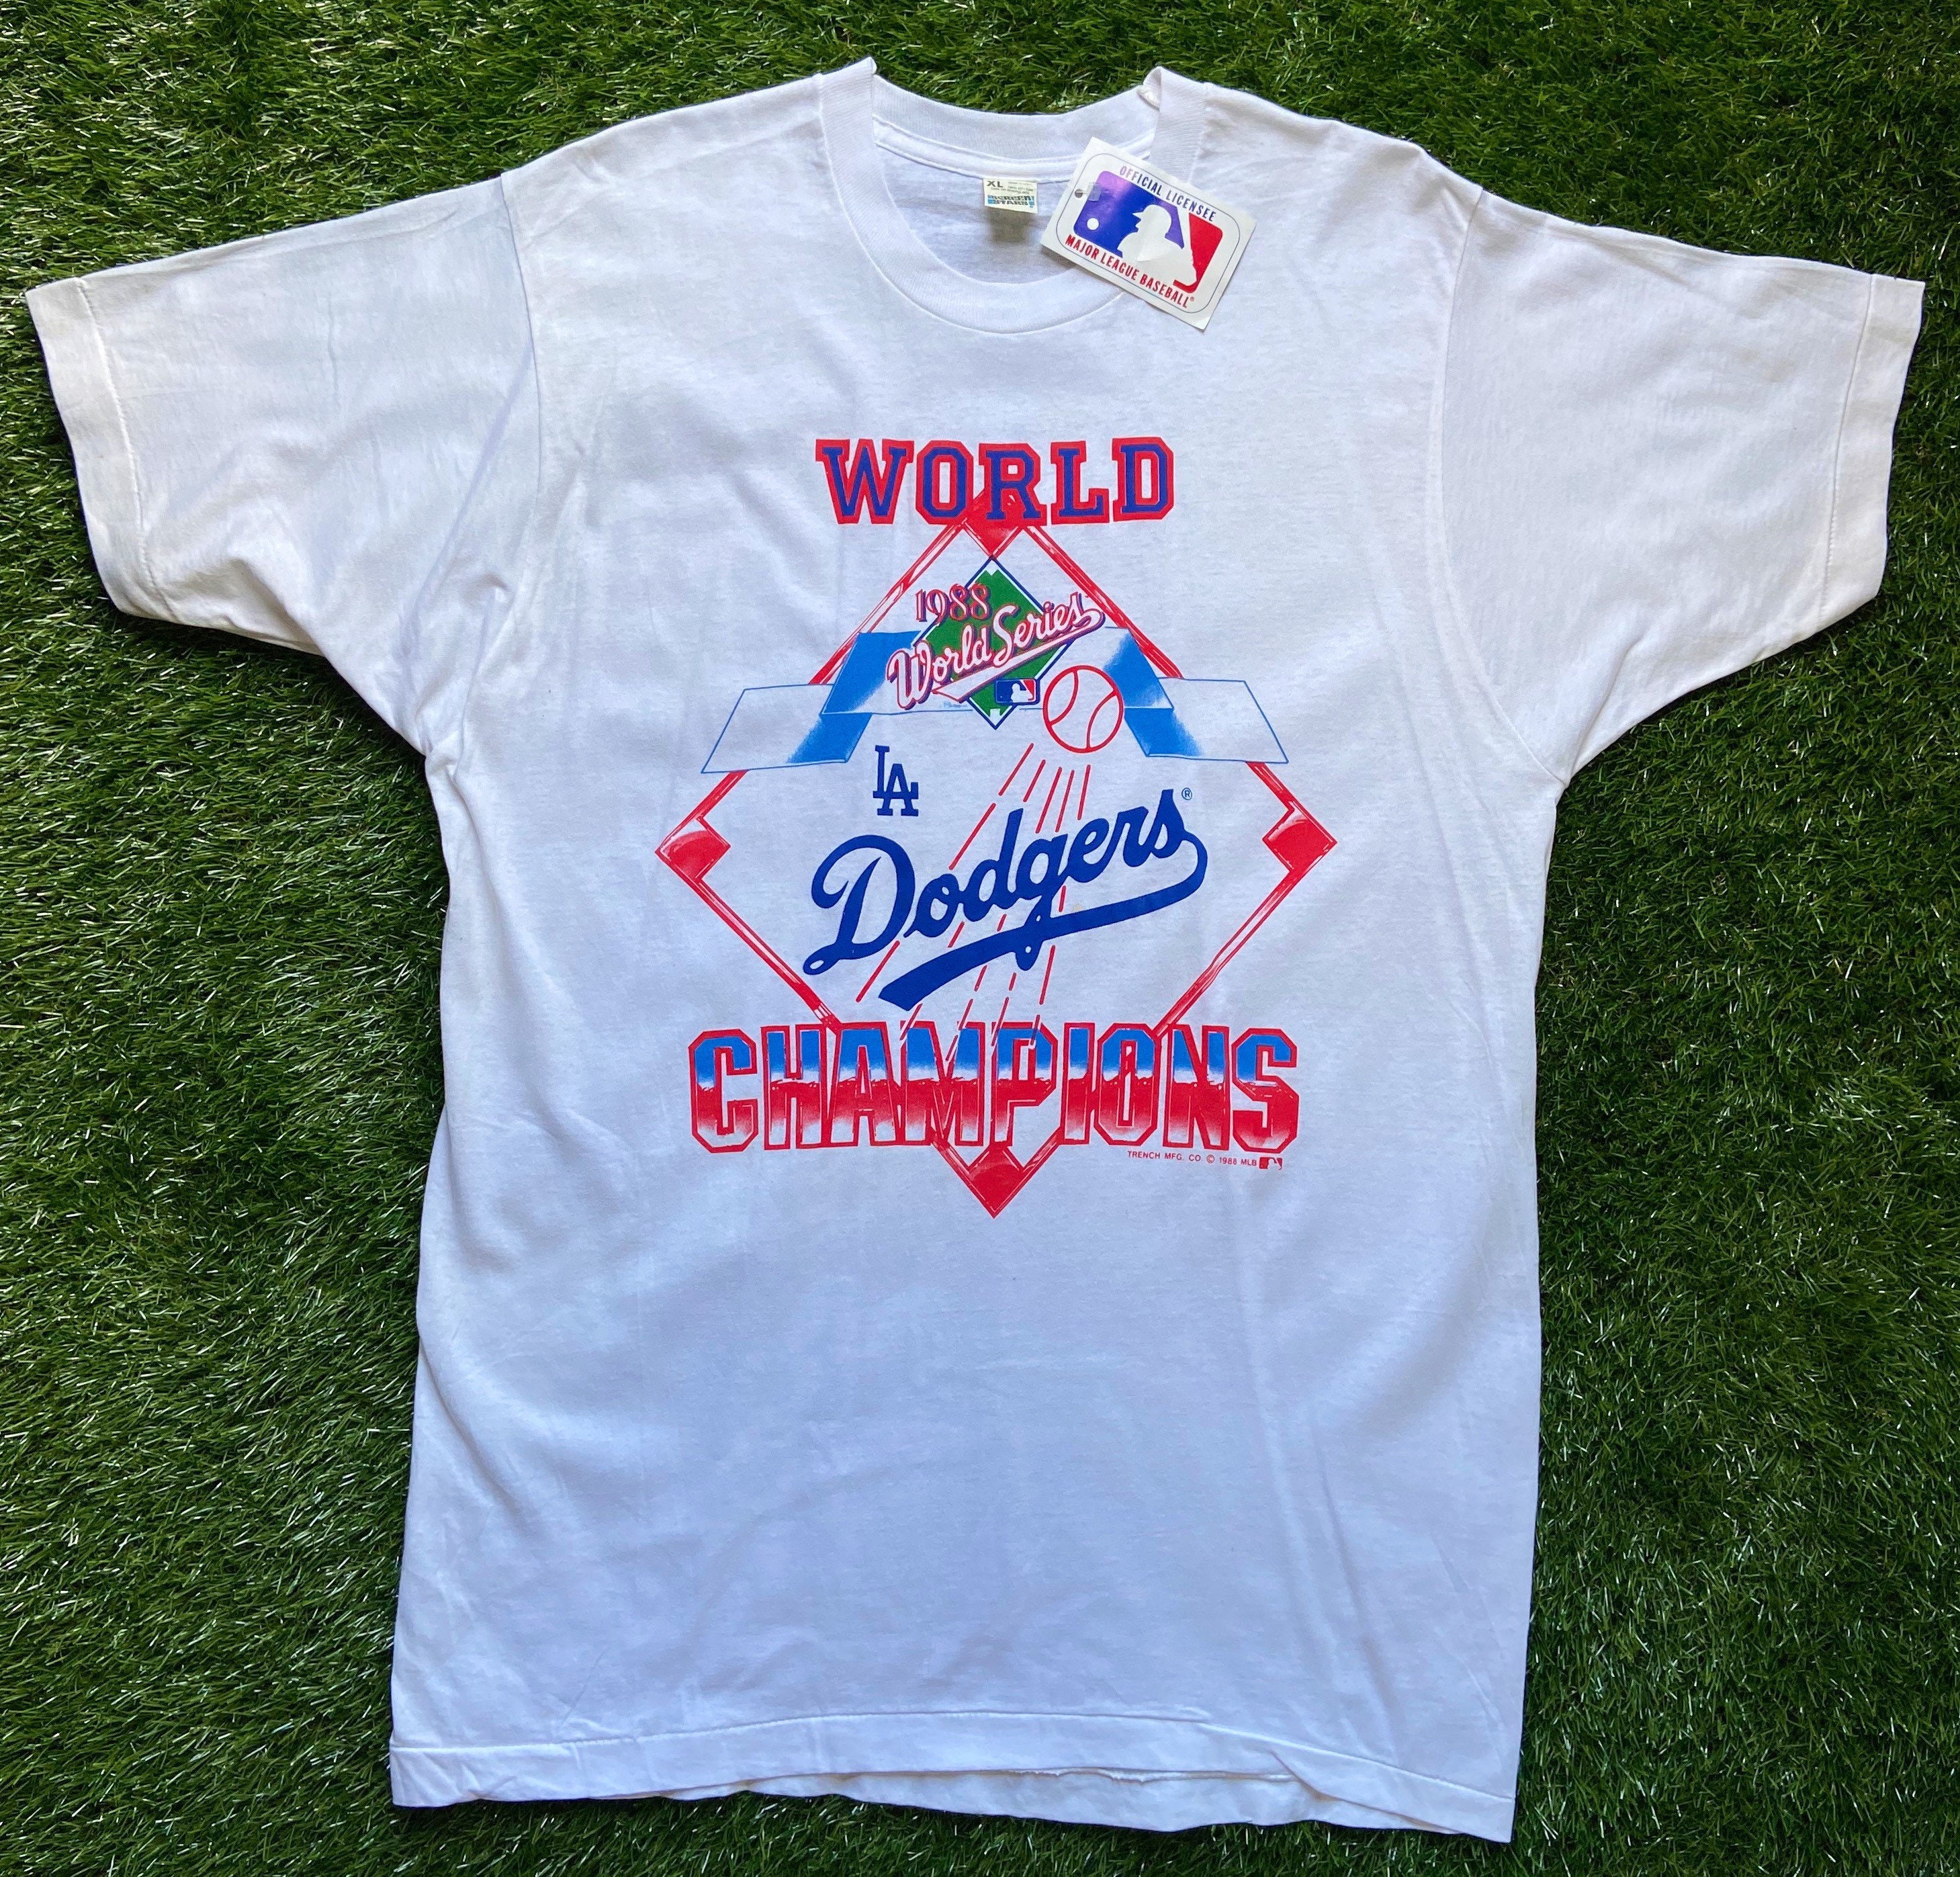 80s dodgers jersey